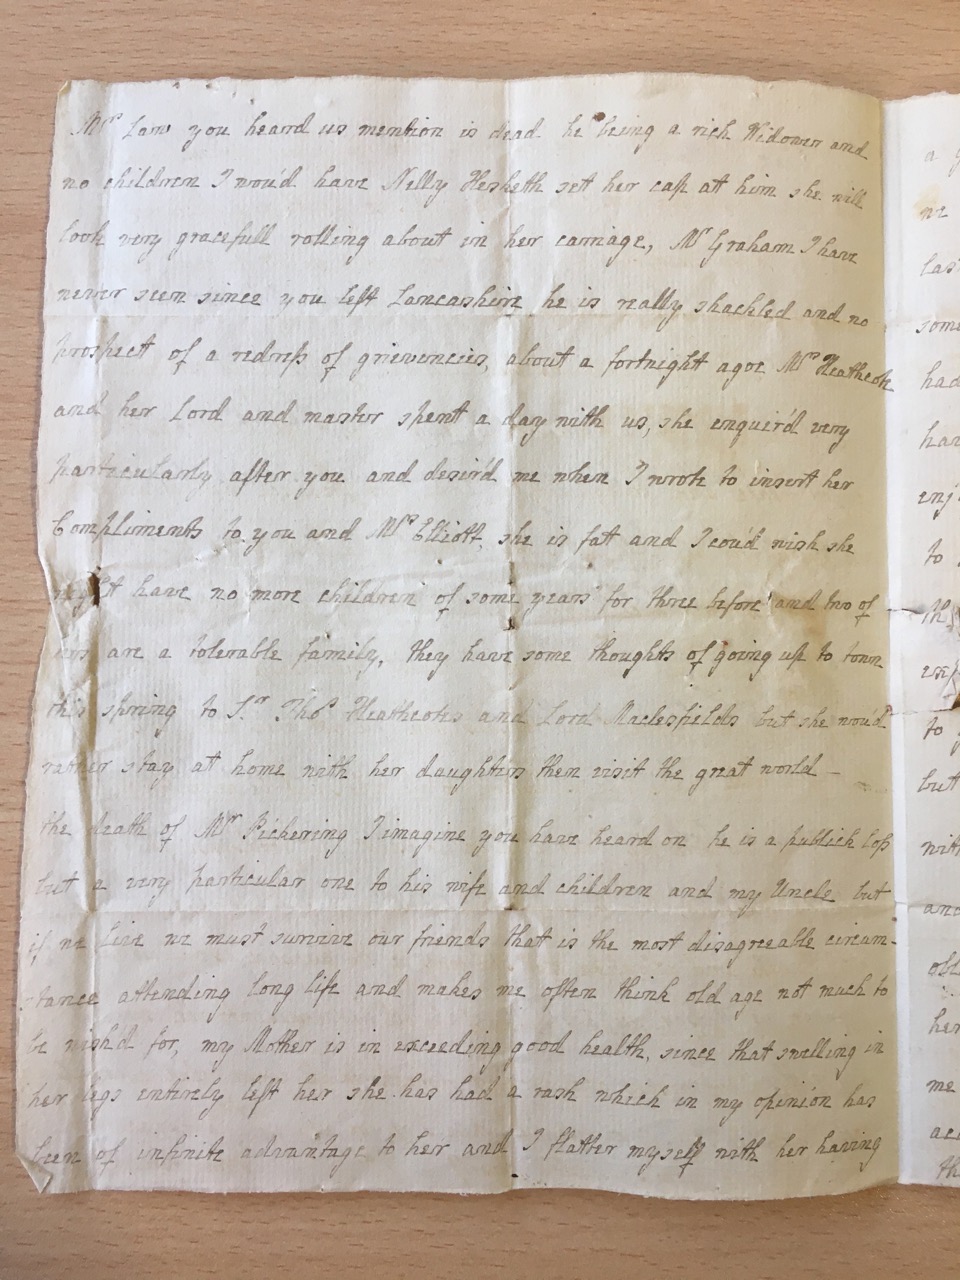 Image #2 of letter: J[enny] Brownsword to Ann Hare, 19 February 1775